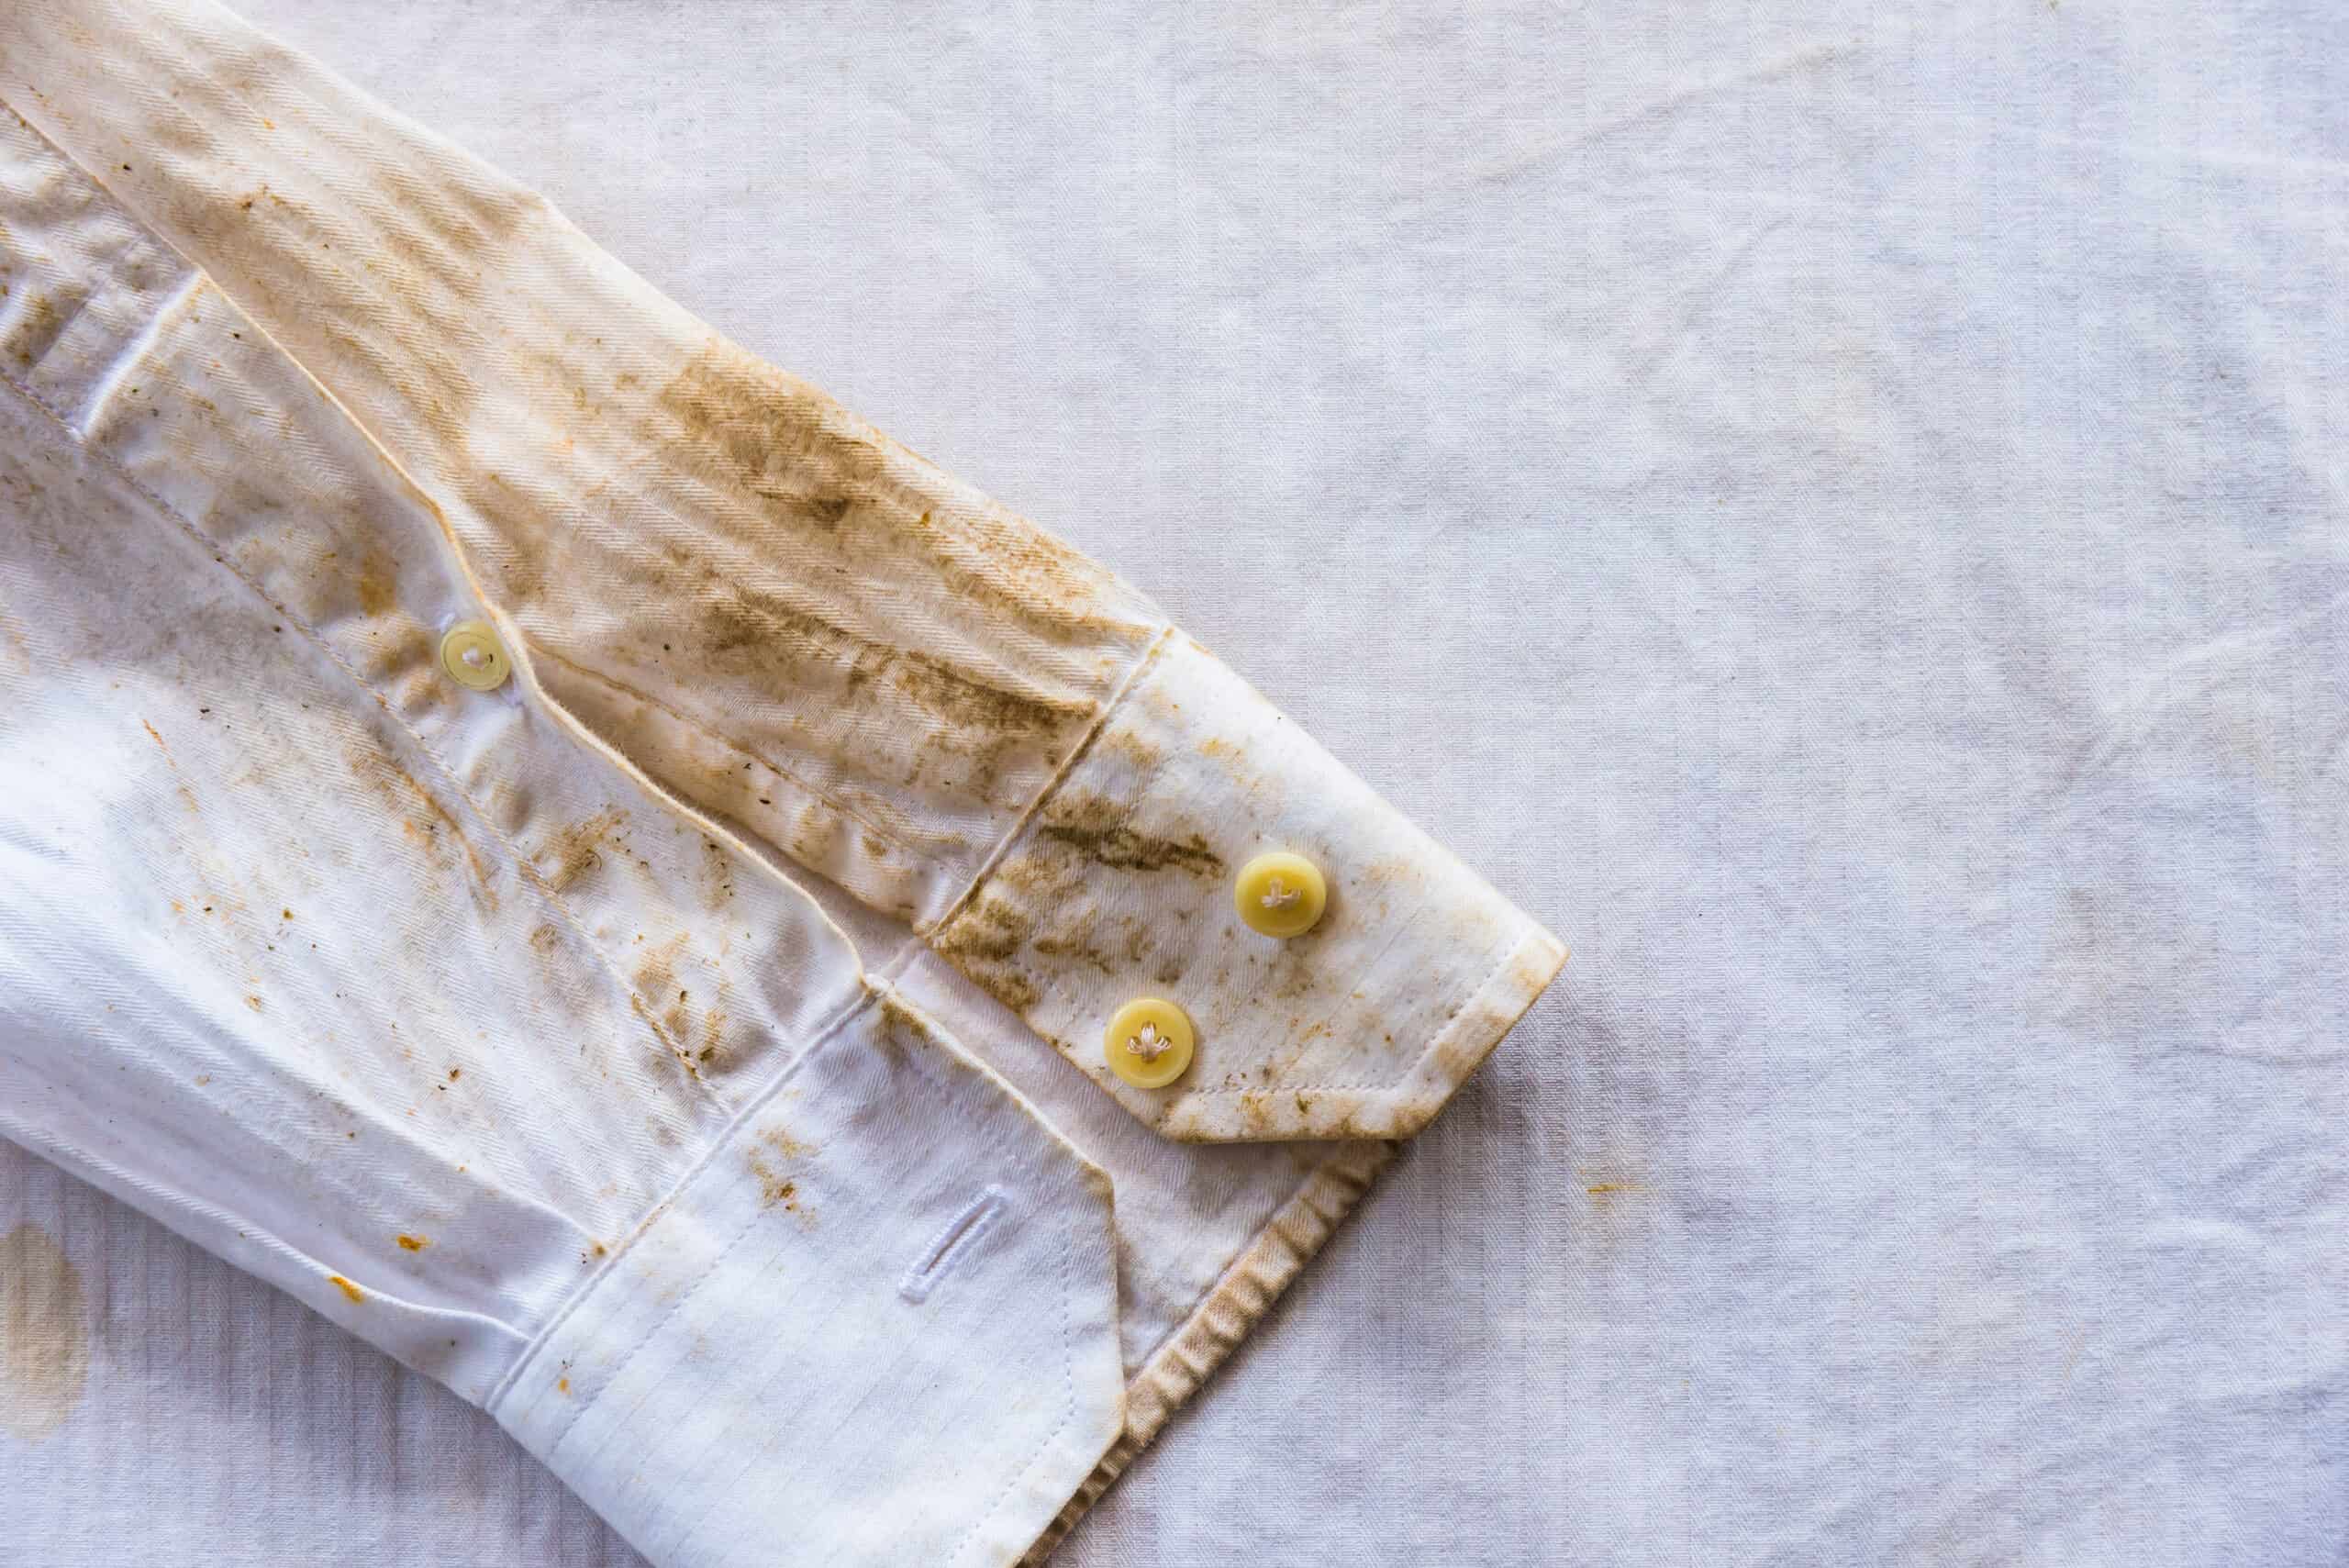 How to remove rust stains from clothes 